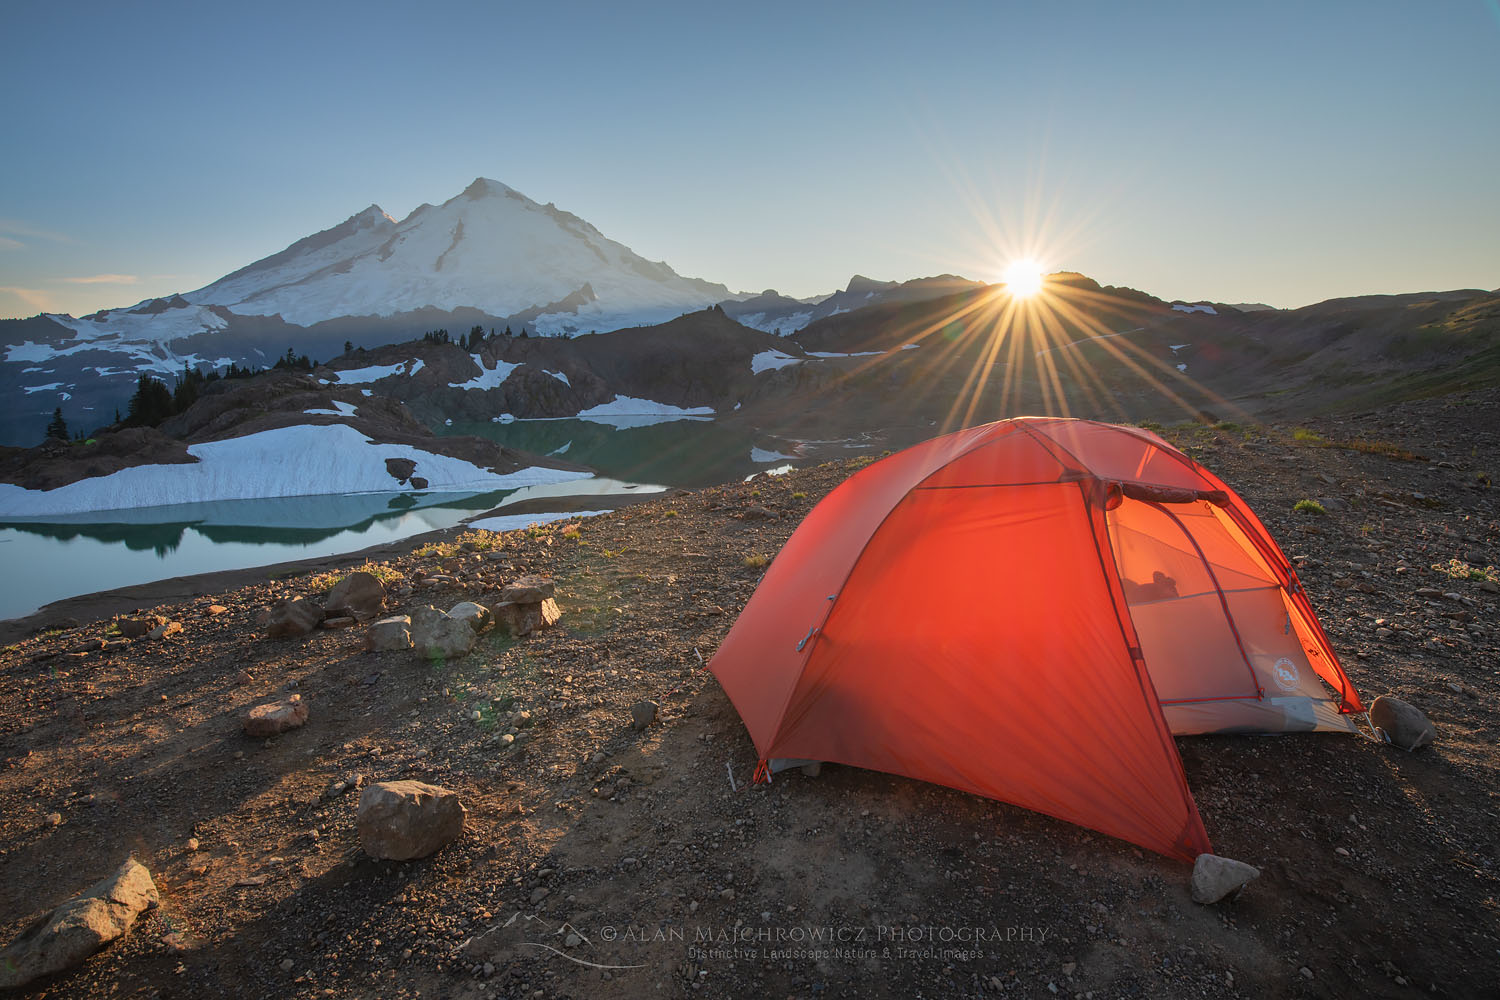 Sunset over Mount Baker and red Big Agnes backpacking tent at backcountry camp on Ptarmigan Ridge, Mount Baker Wilderness. North Cascades Washington #73634